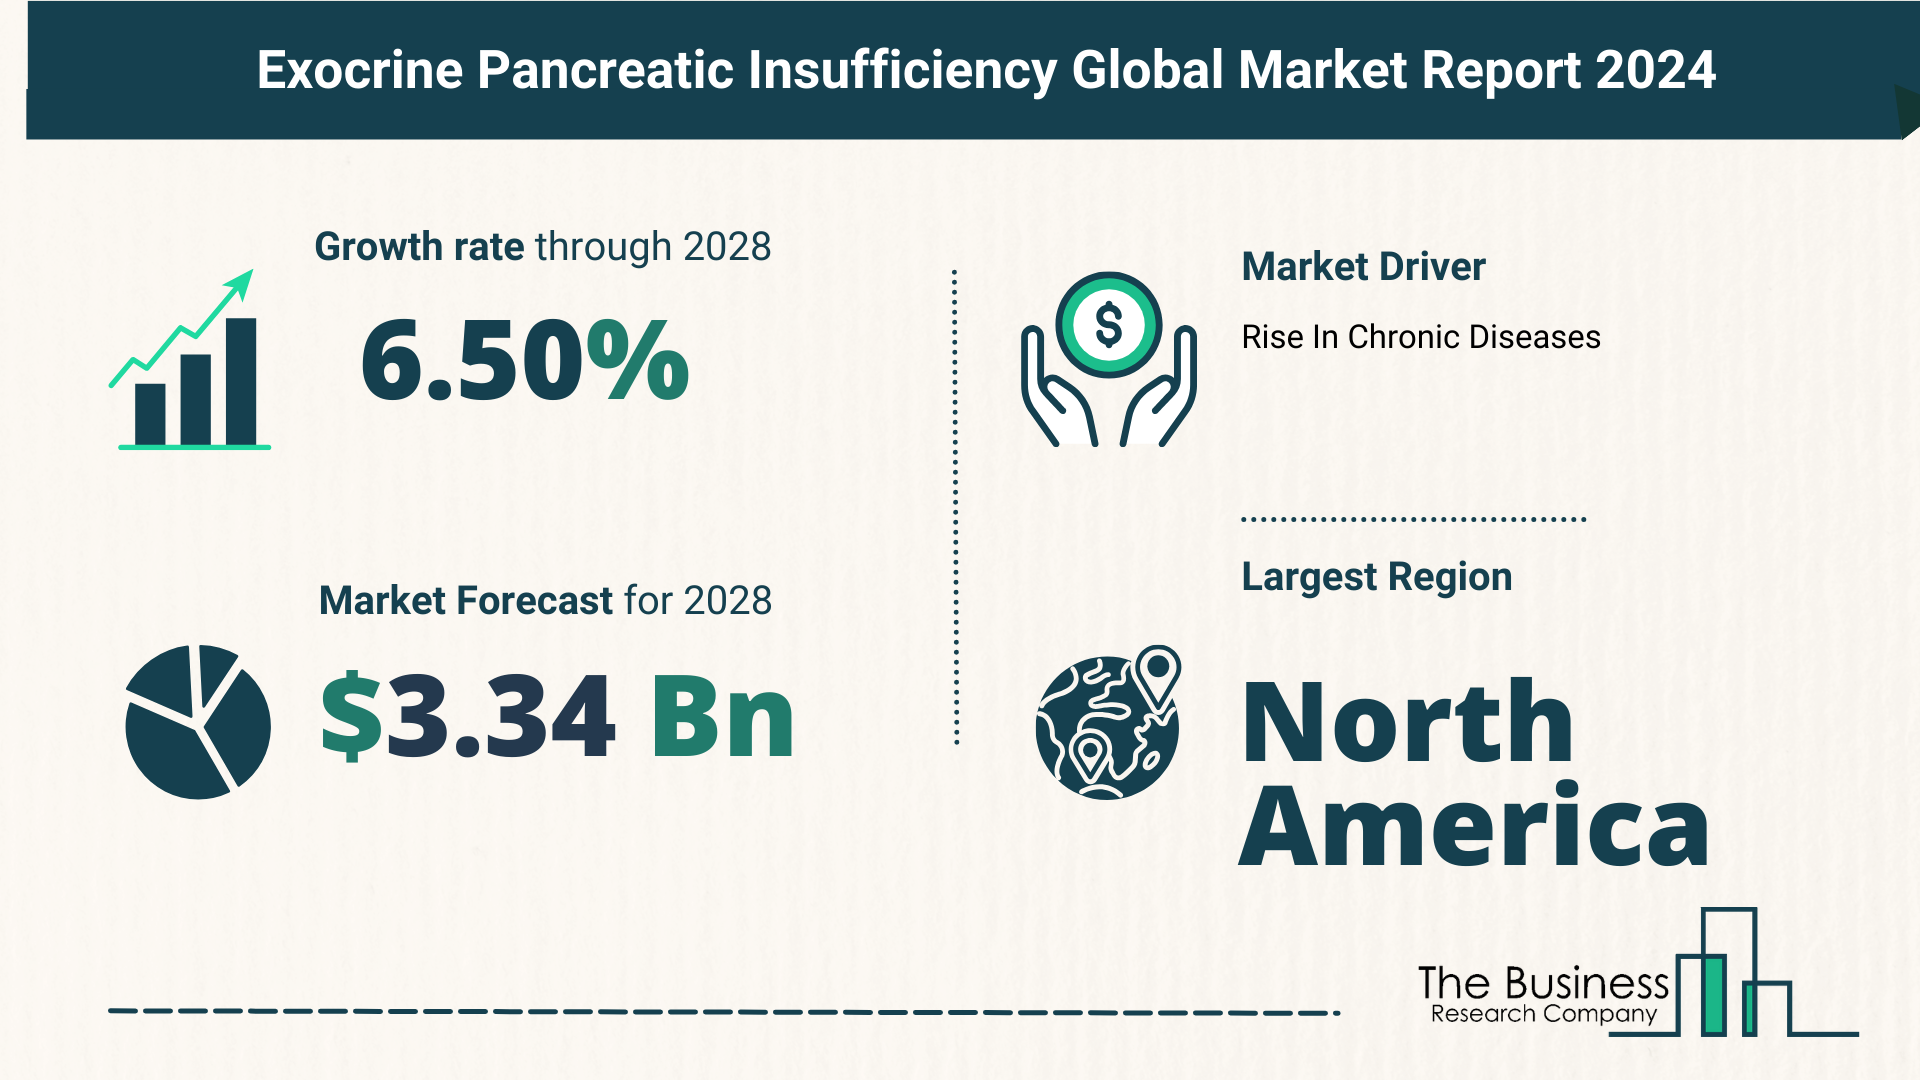 Key Insights On The Exocrine Pancreatic Insufficiency Market 2024 – Size, Driver, And Major Players